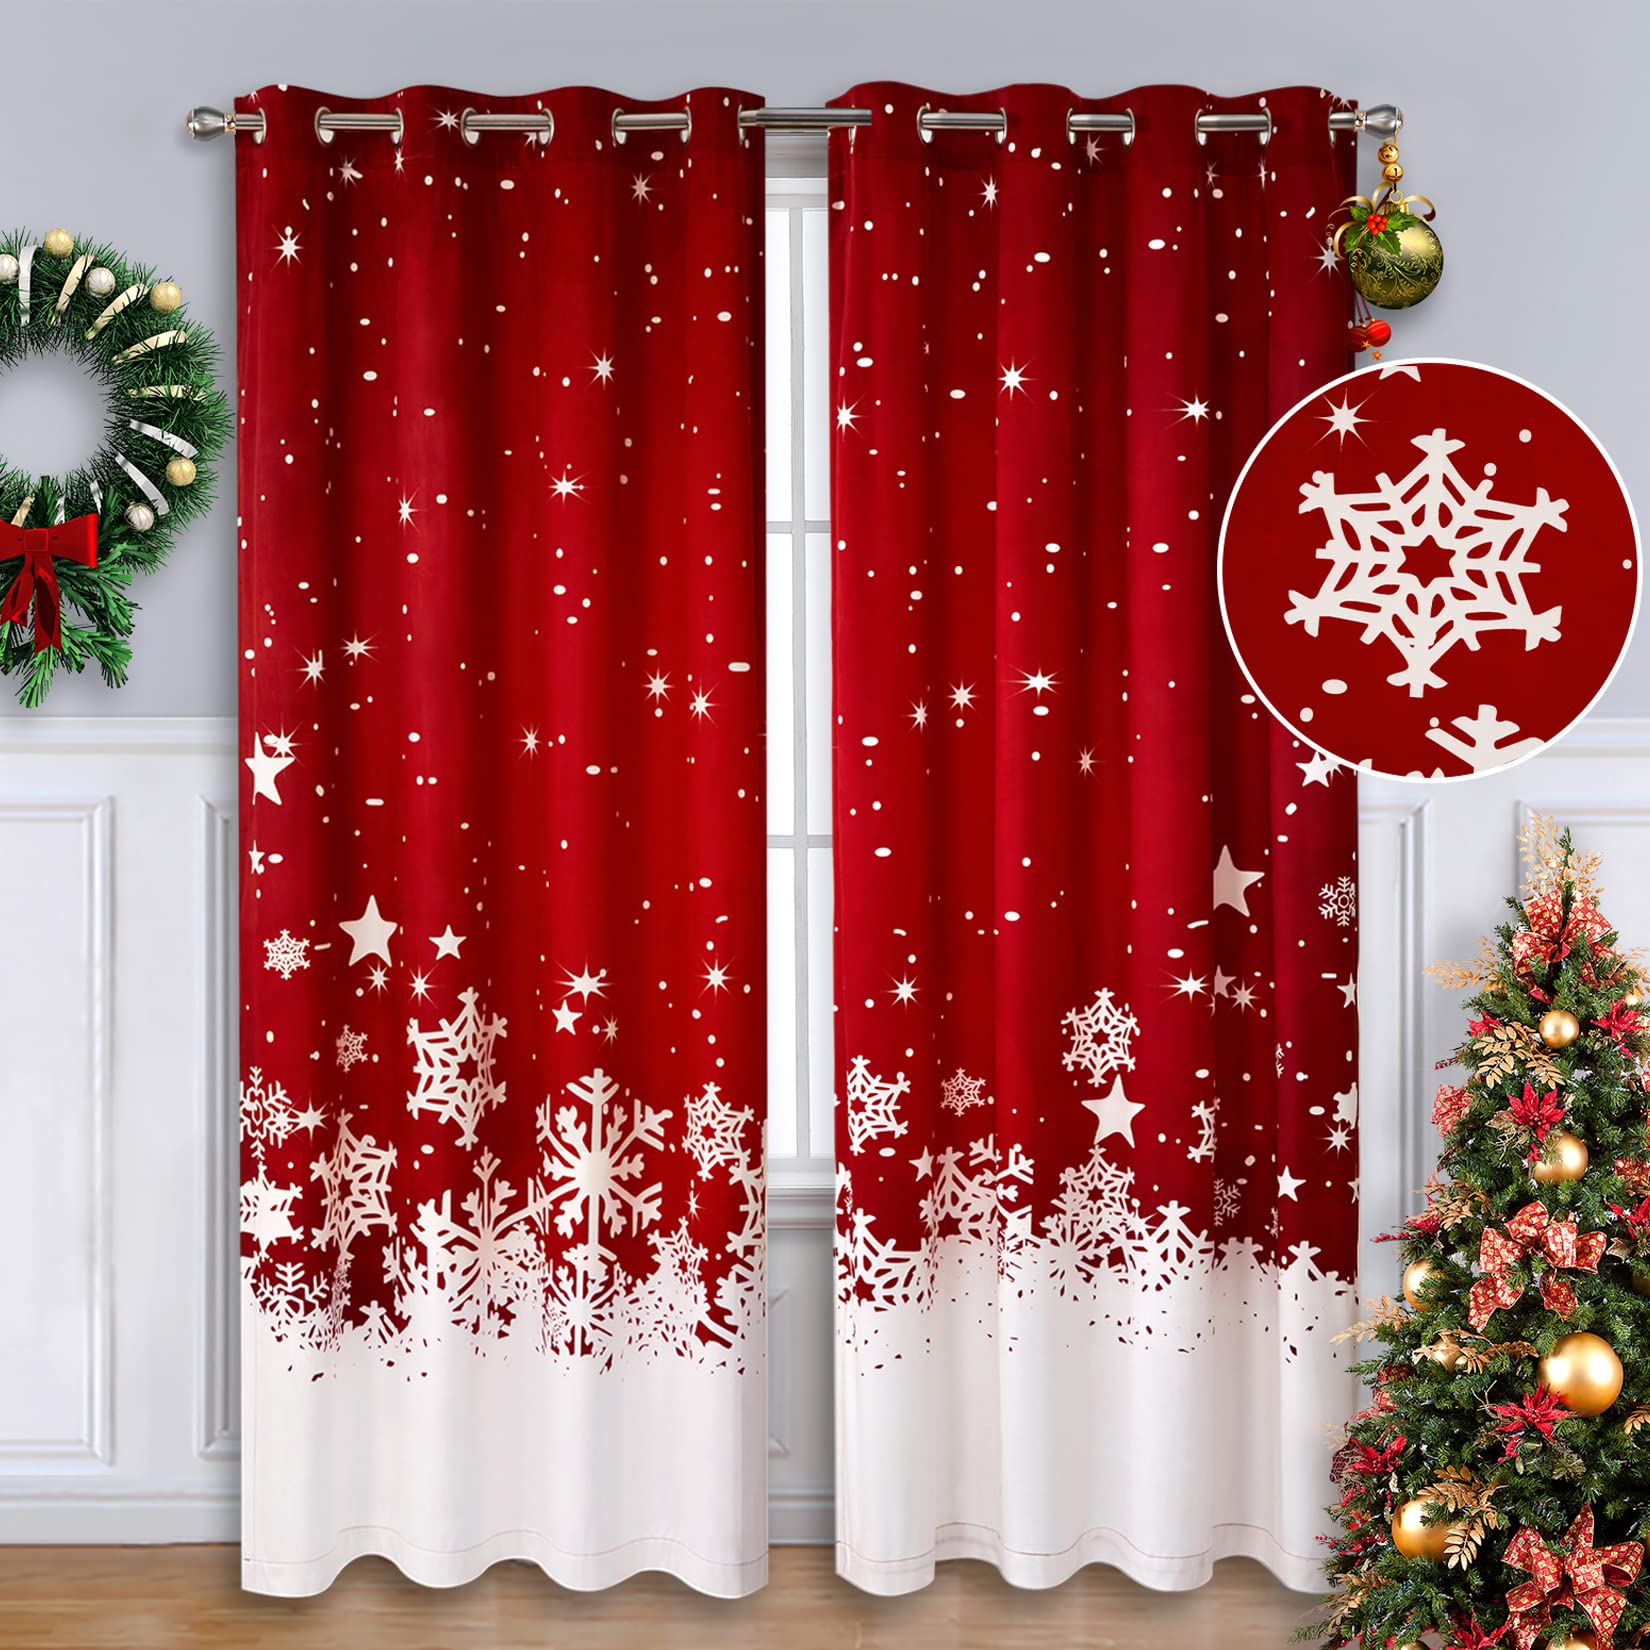 CAROMIO Christmas Curtains for Living Room 4 Panels, Velvet Red Window Curtains 95 Inches Long for Bedroom, Floral Snowflake Dec